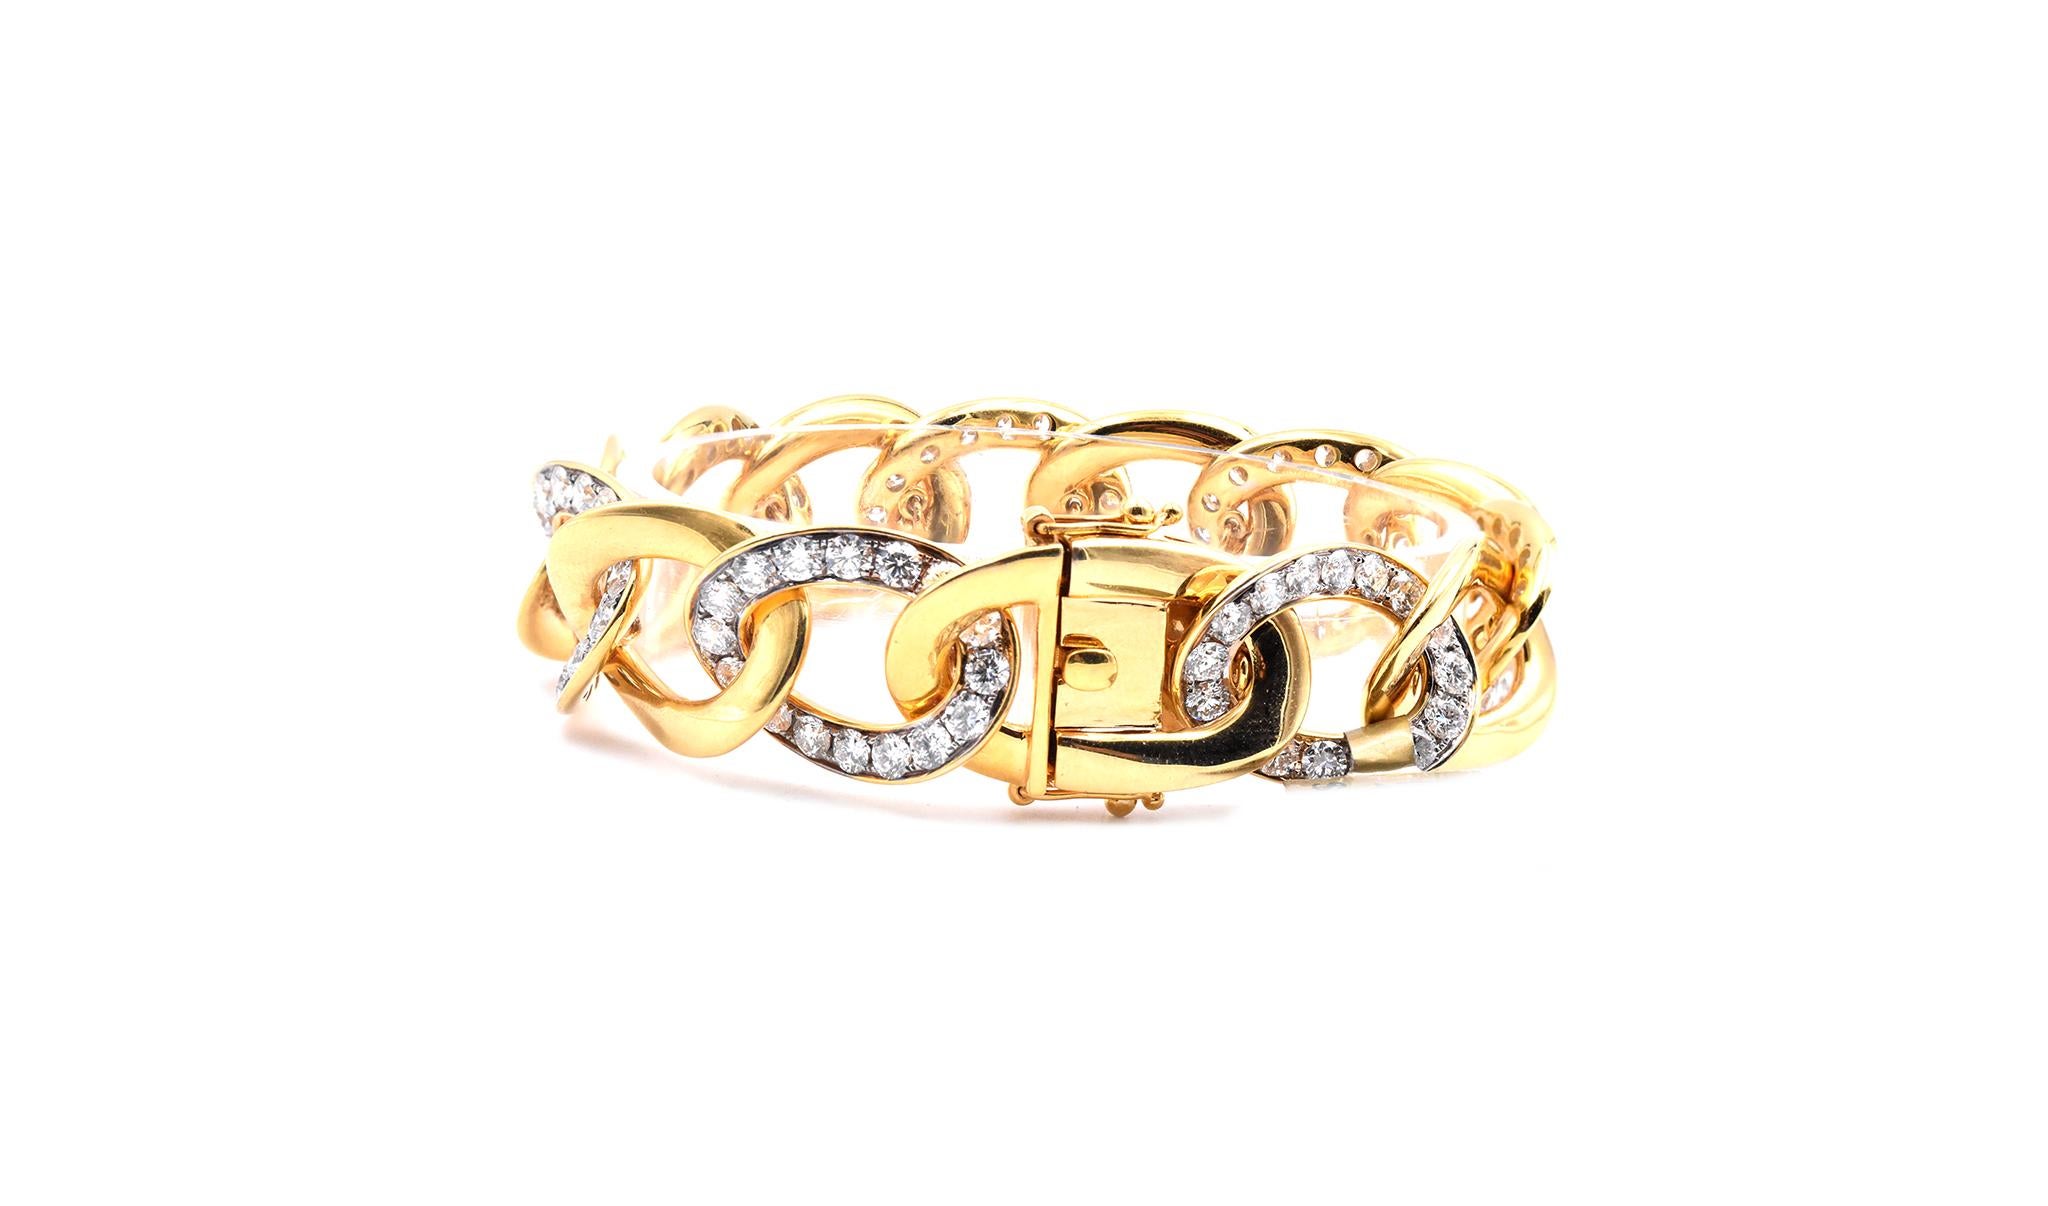 14 Karat Yellow Gold Diamond Oval Link Bracelet In Excellent Condition For Sale In Scottsdale, AZ